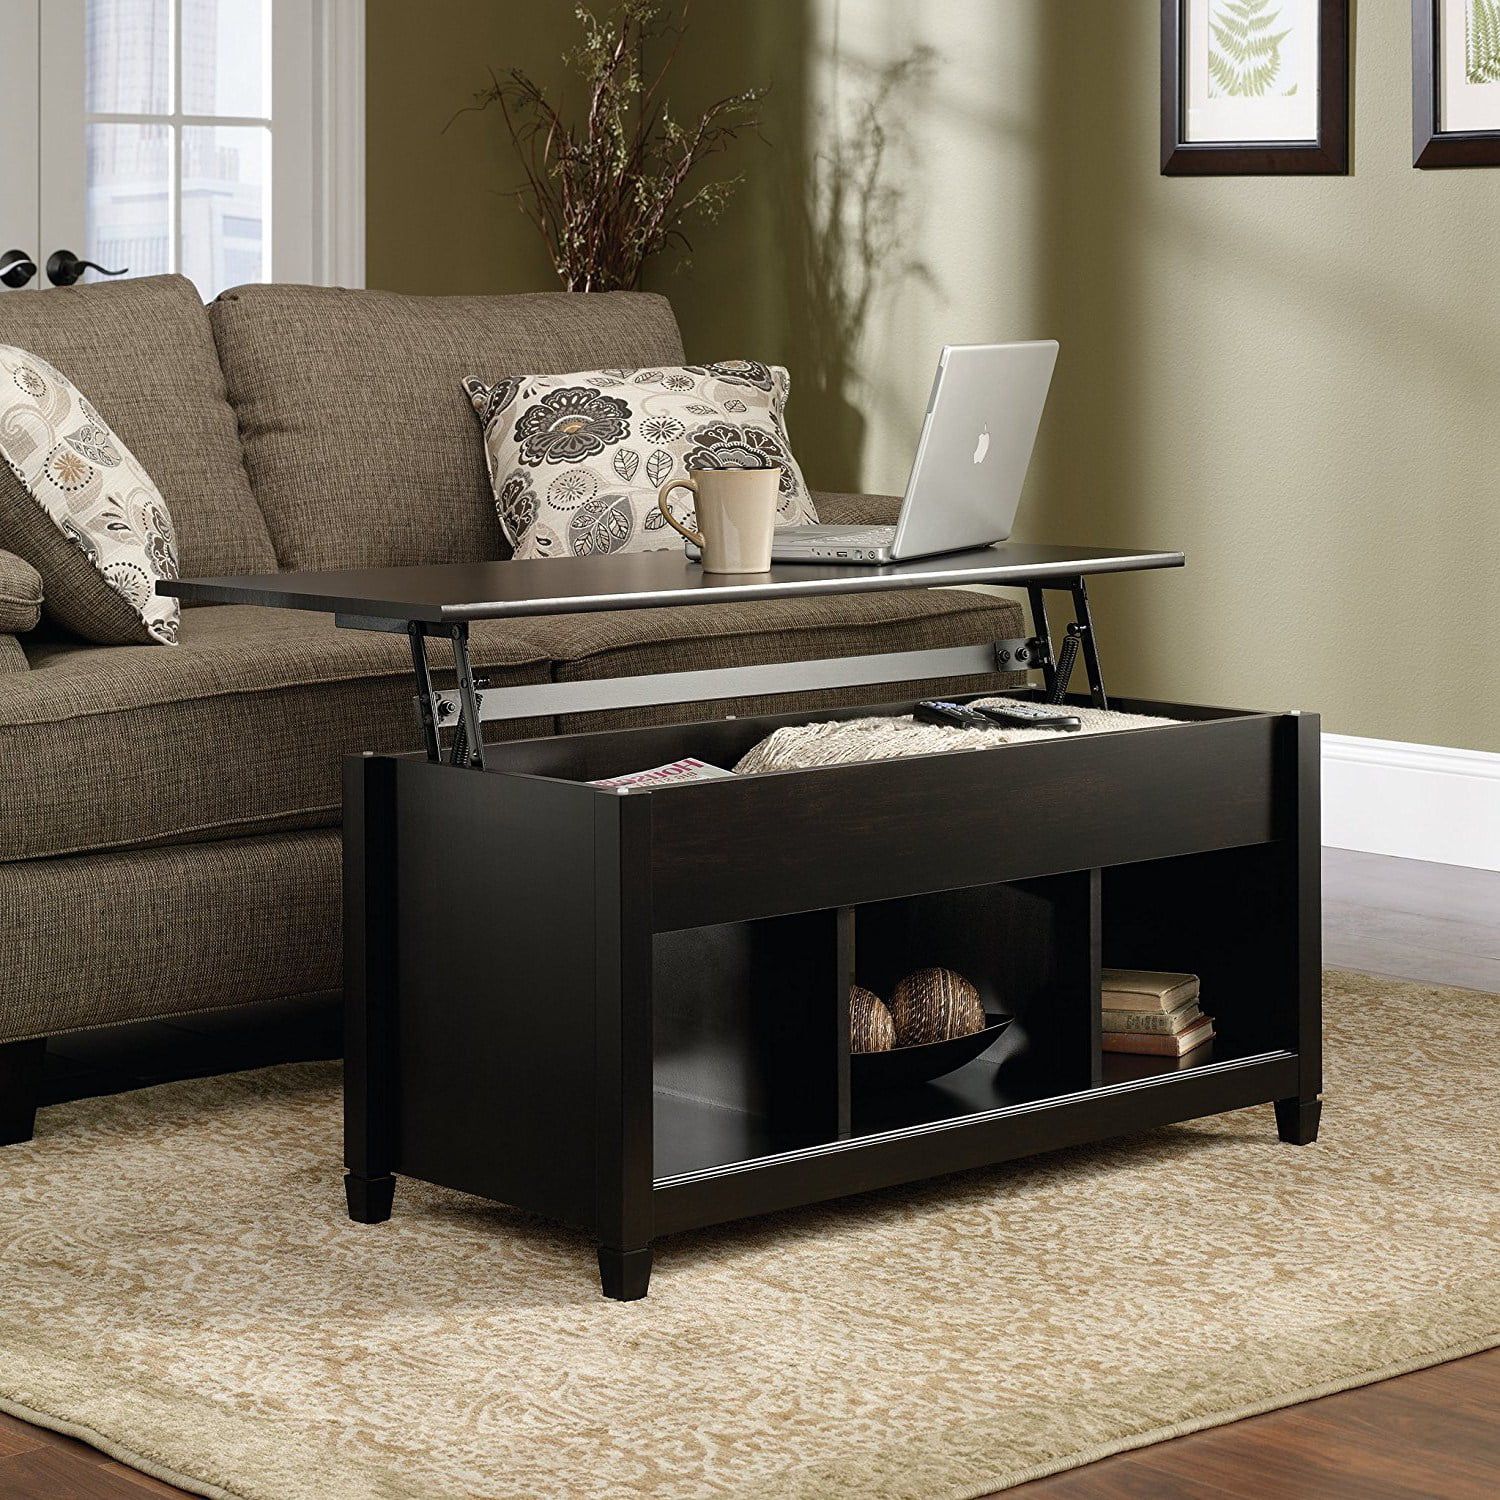 Zimtown Lift Up Top Coffee Table With Hidden Compartment End Rectangle Within Lift Top Coffee Tables With Storage (View 3 of 20)